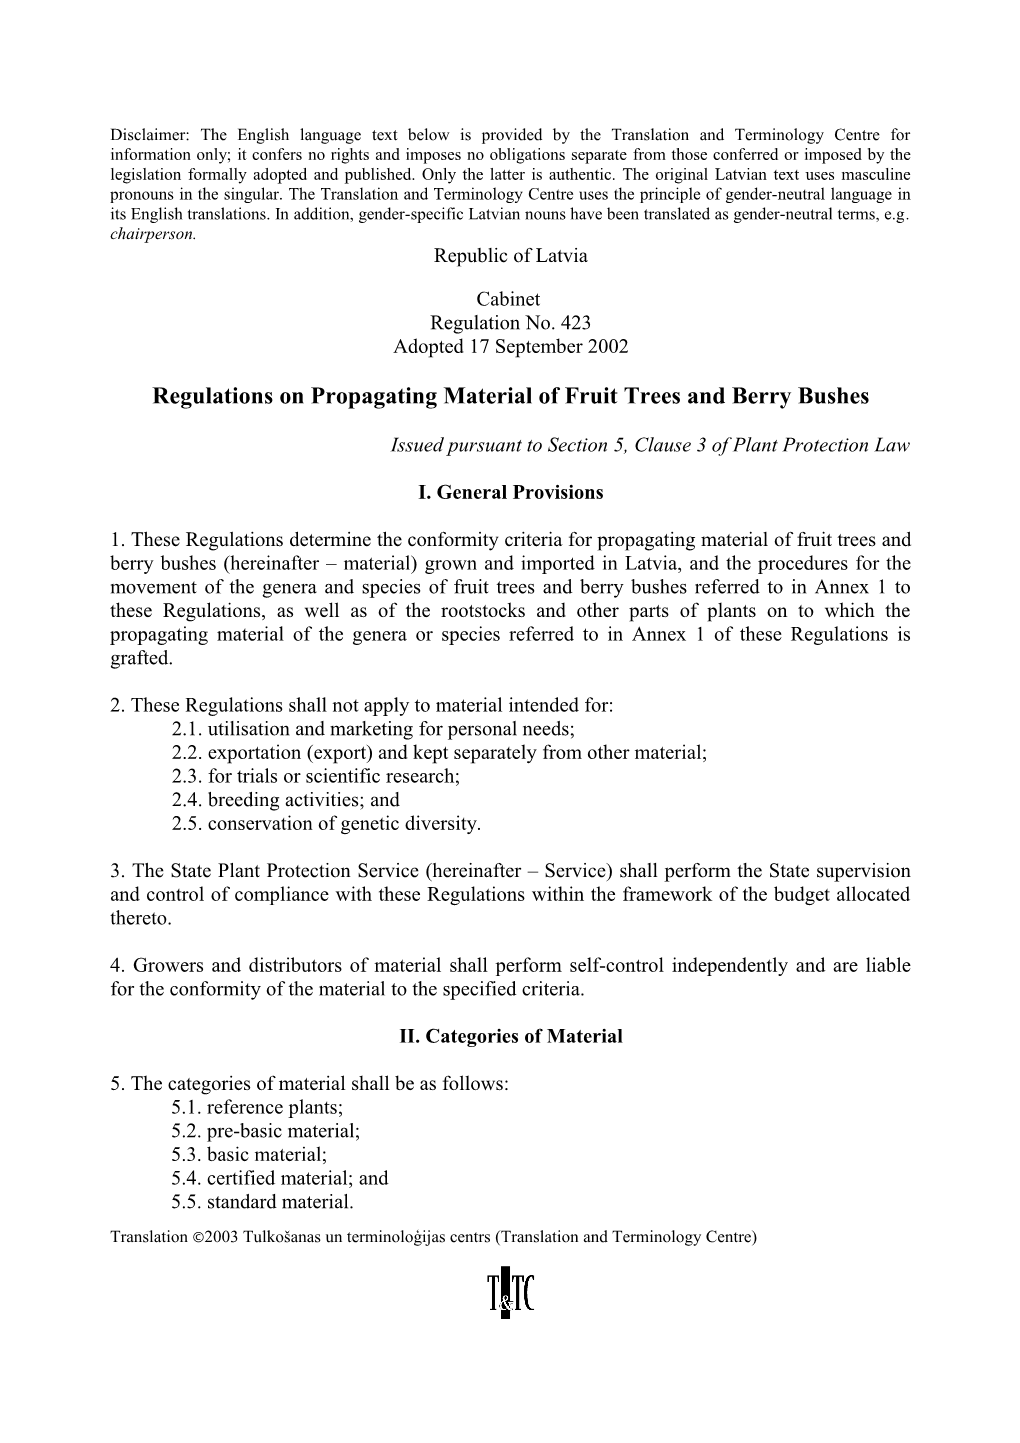 Regulations on Propagating Material of Fruit Trees and Berry Bushes